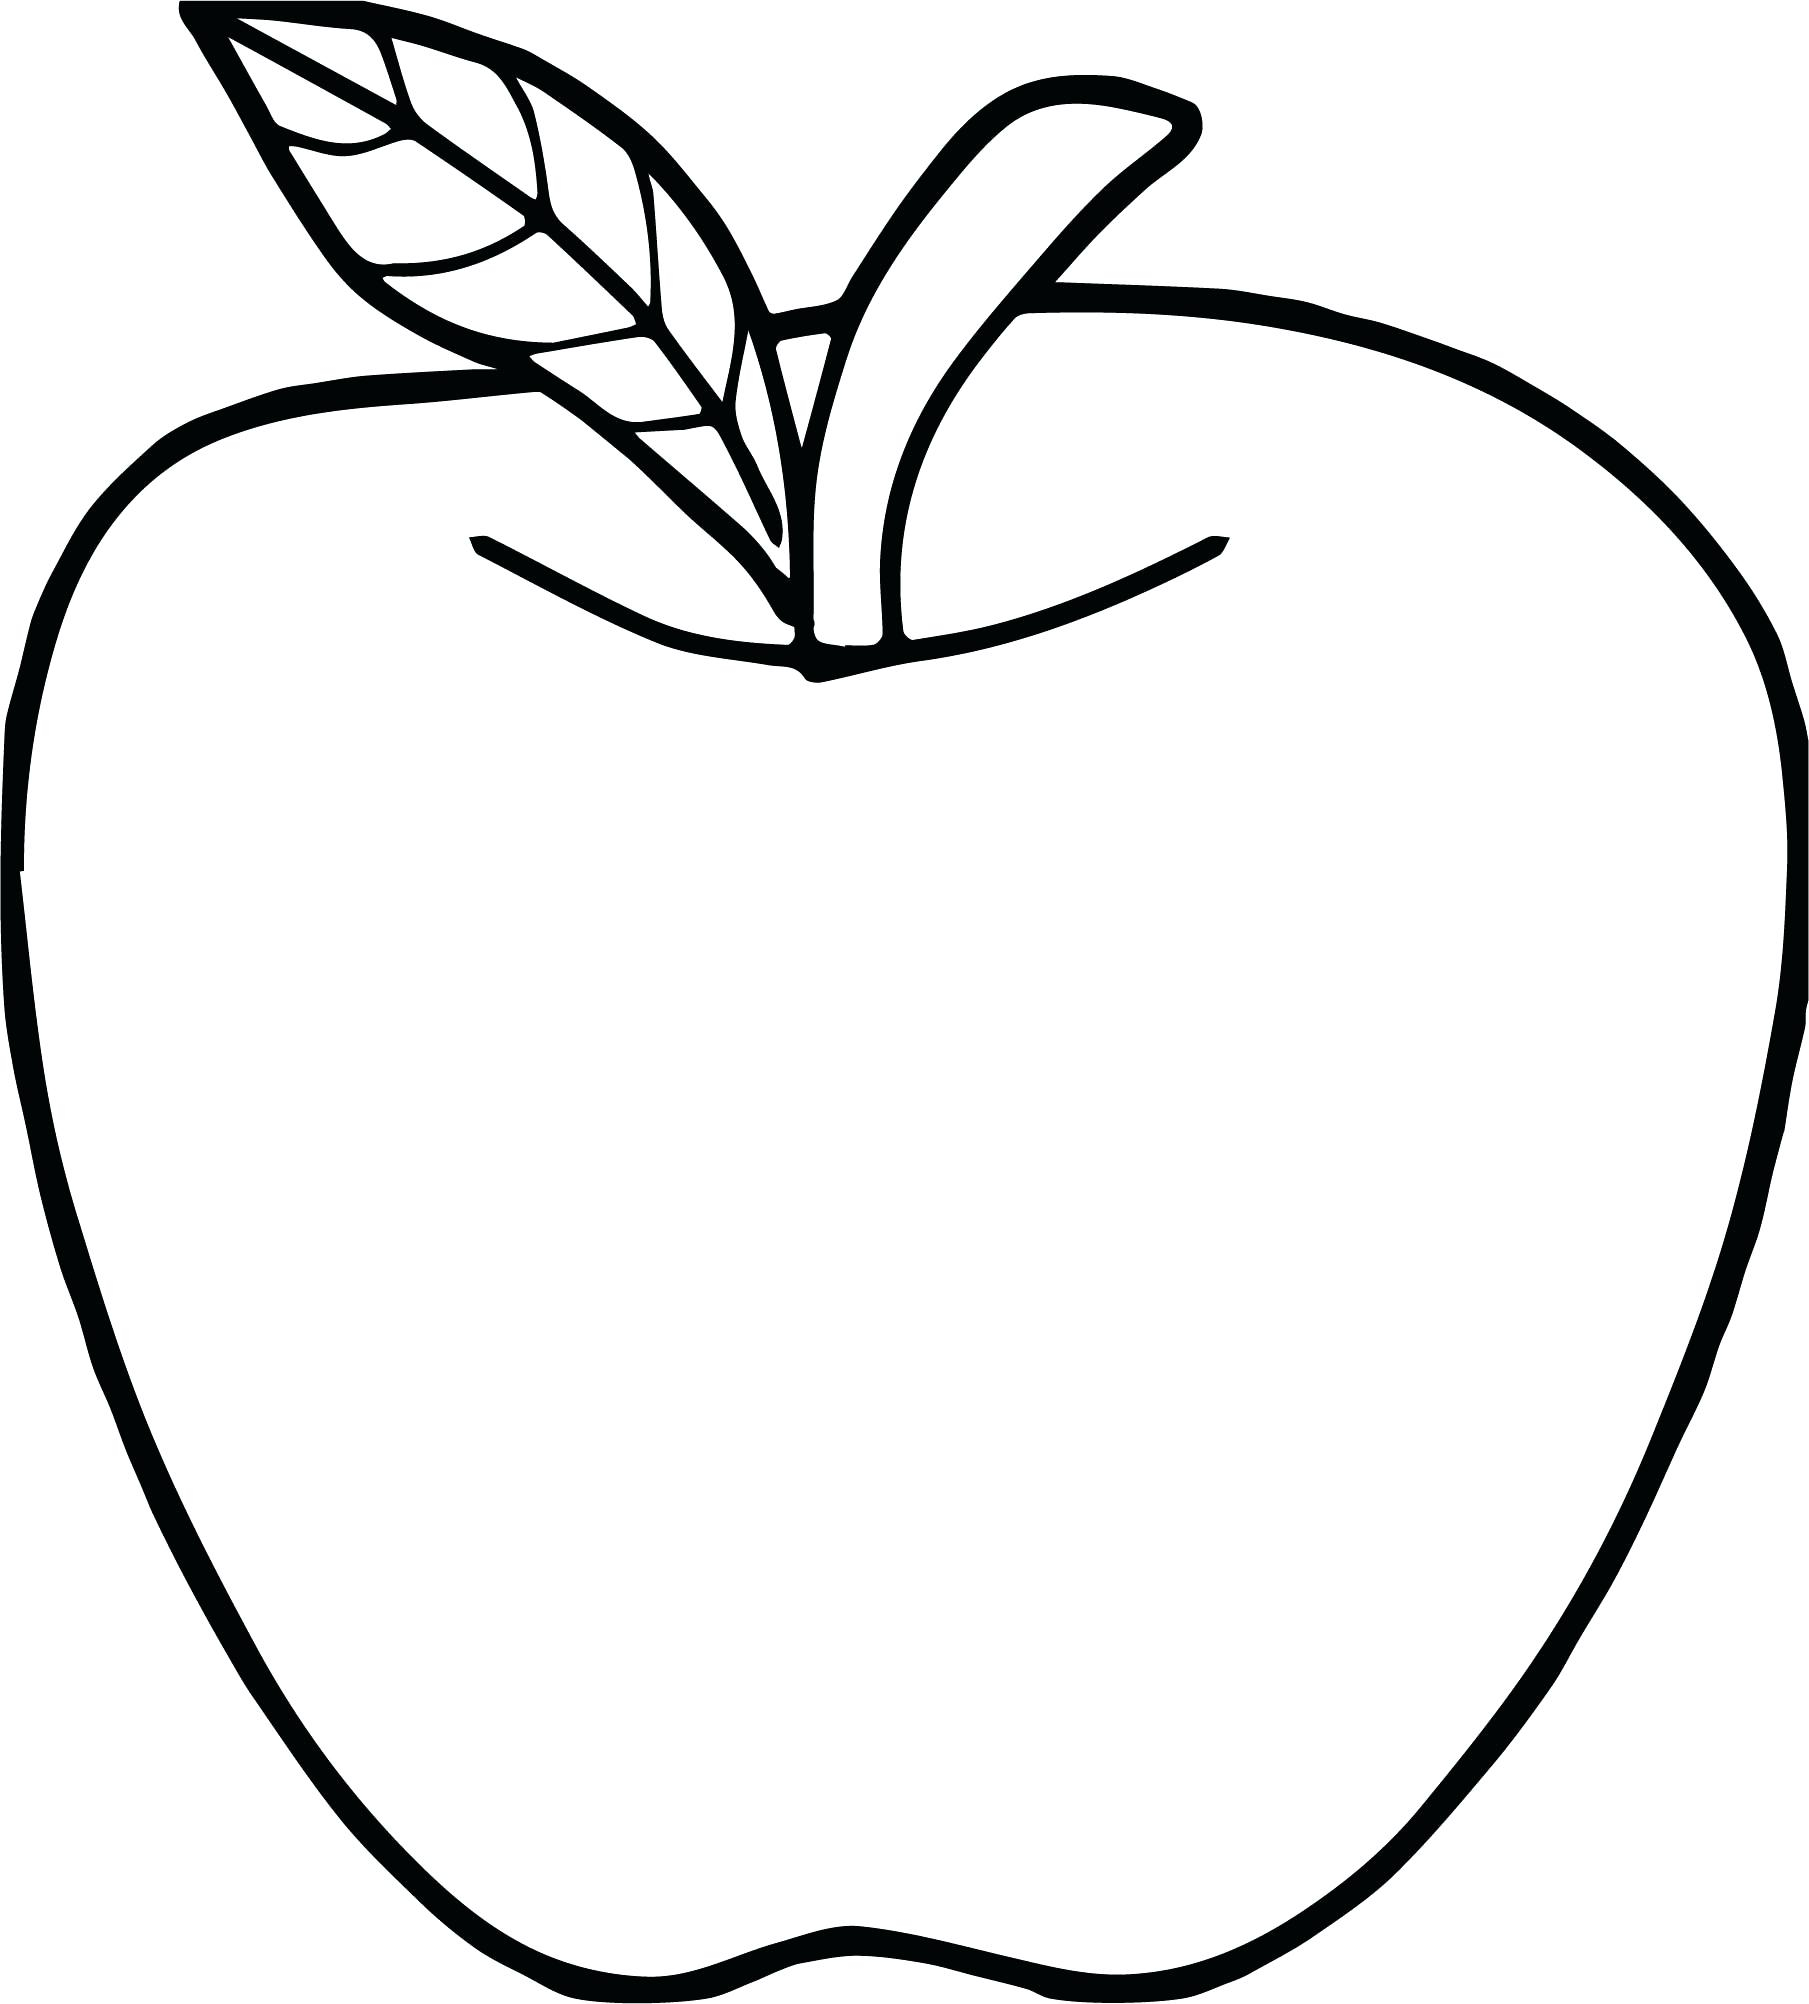 Printable Apple Coloring Pages Coloring Pages Apple Coloring Photo Apples For Kindergarten Fruit